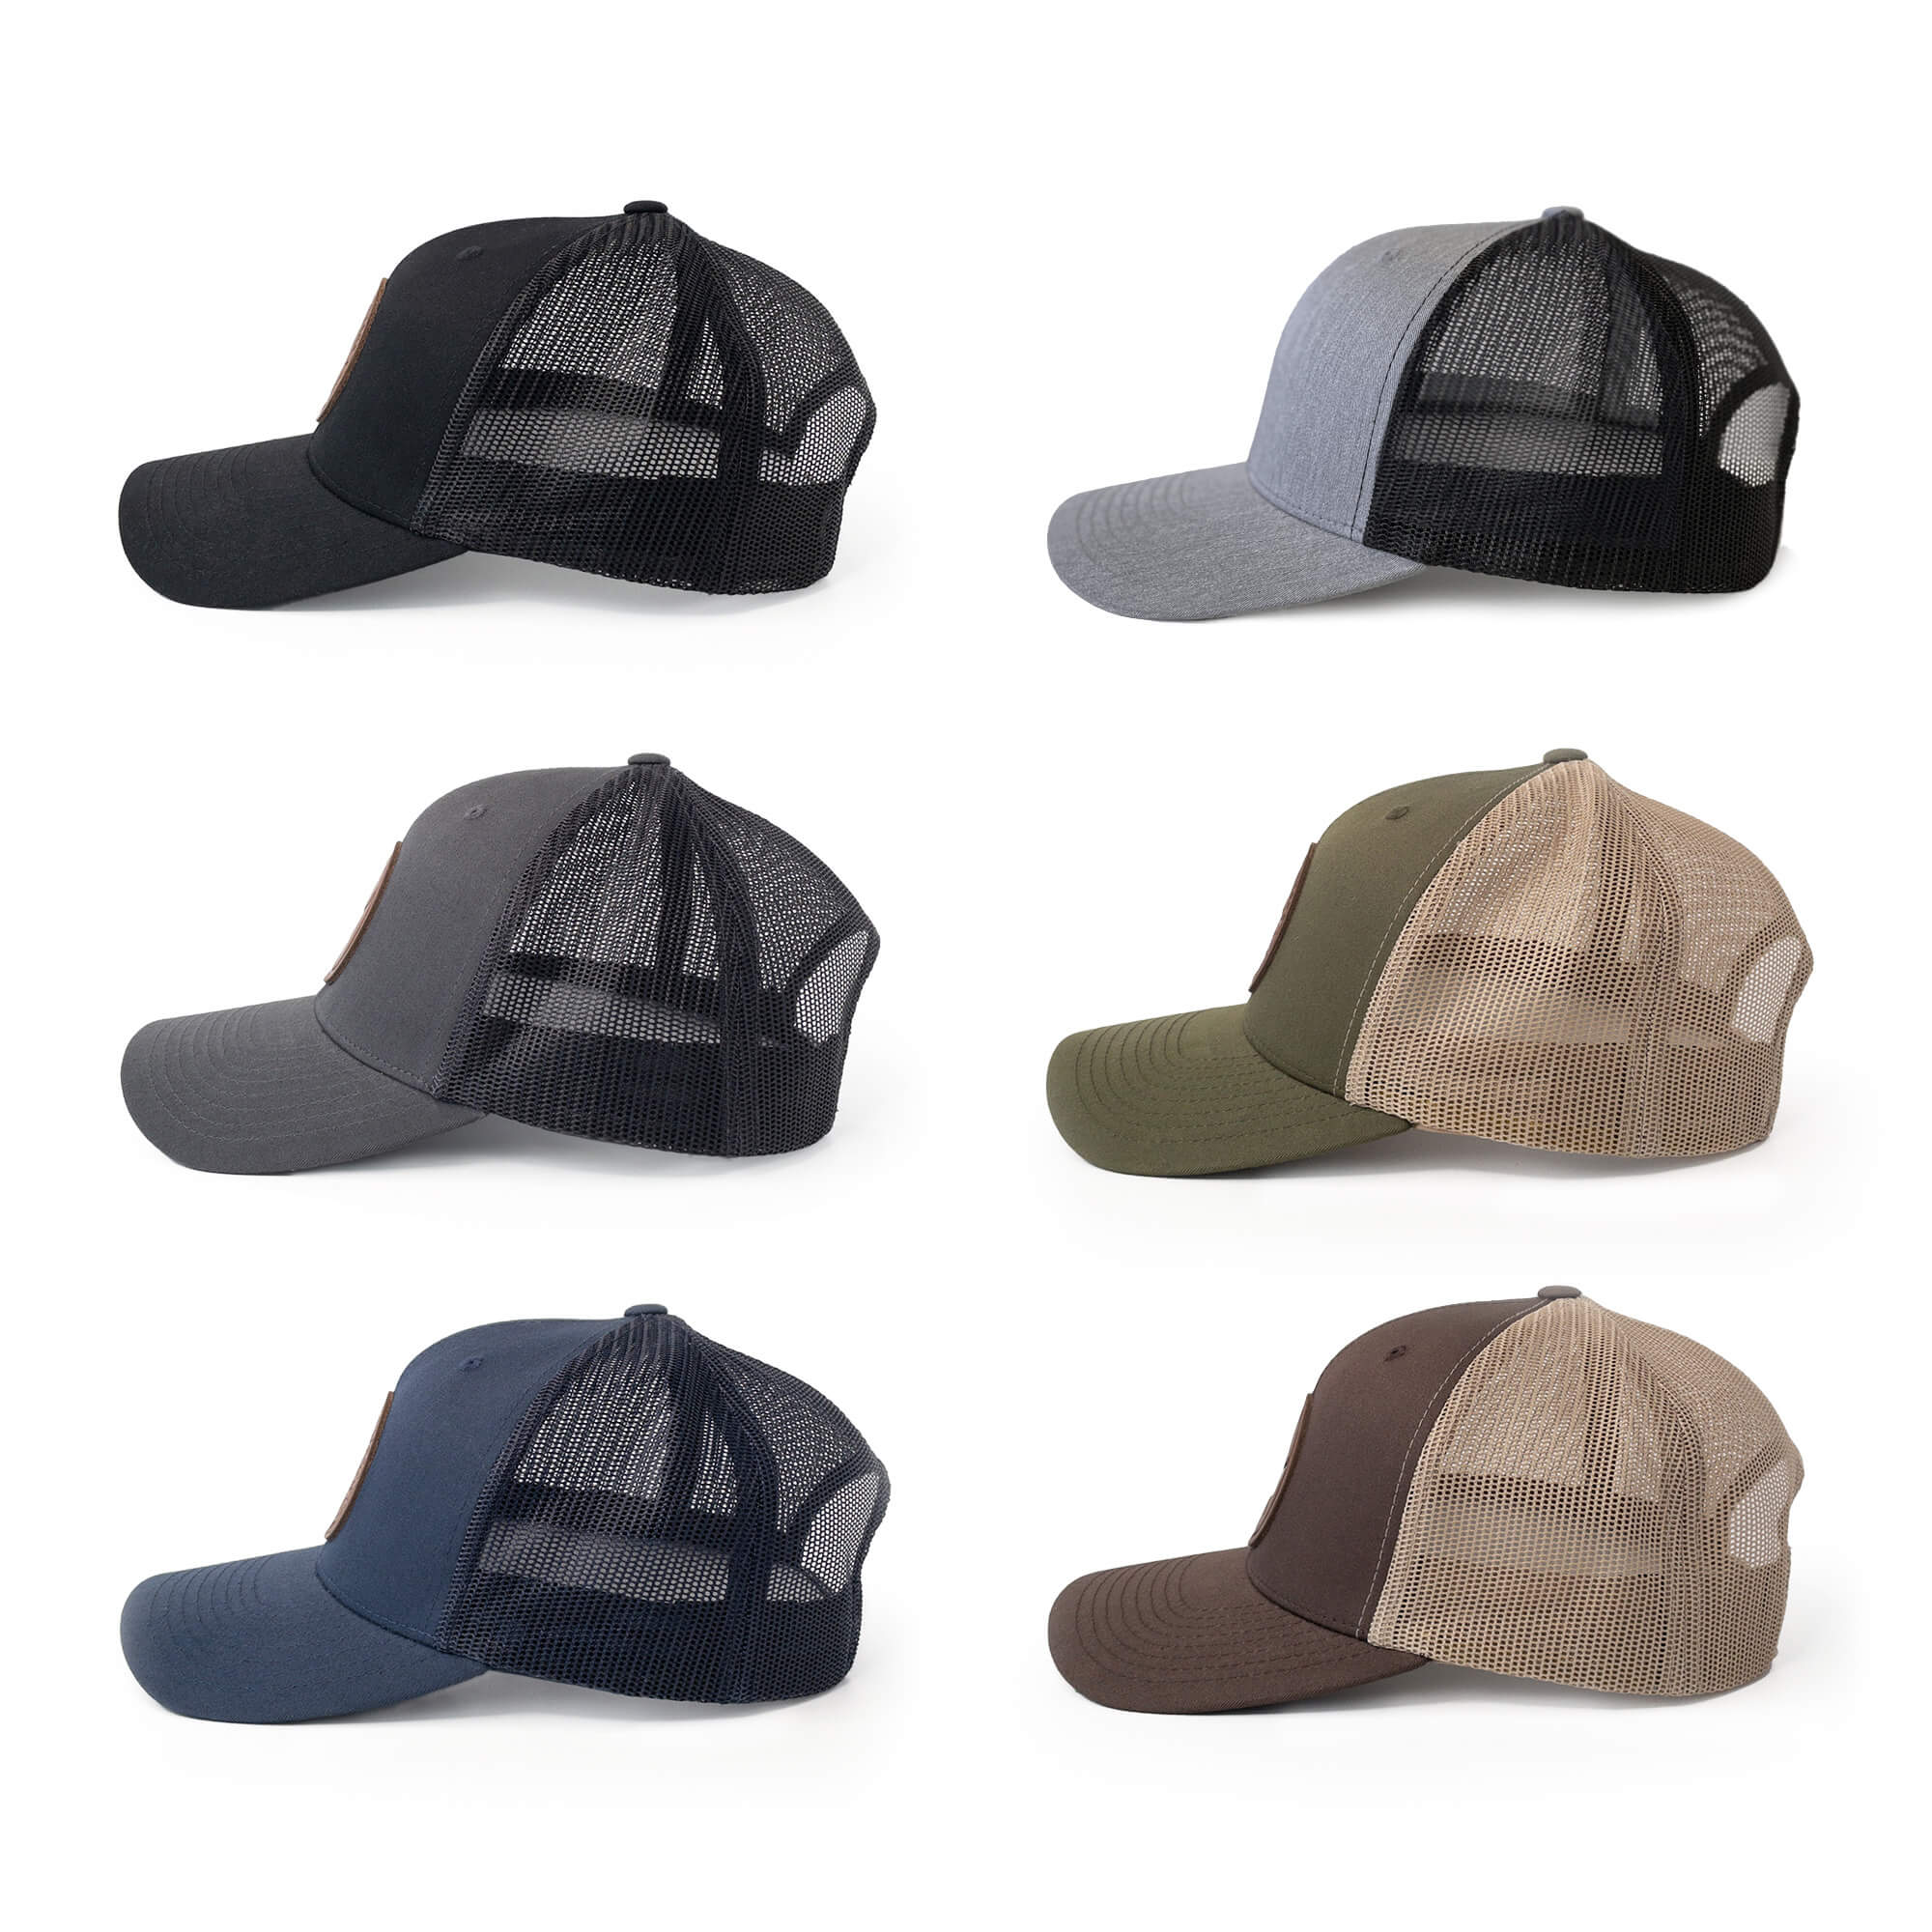 Leather patch trucker hats available in 6 colors | BLACK-002-001, CHARC-002-001, NAVY-002-001, HGREY-002-001, MOSS-002-001, BROWN-002-001, RED-002-001